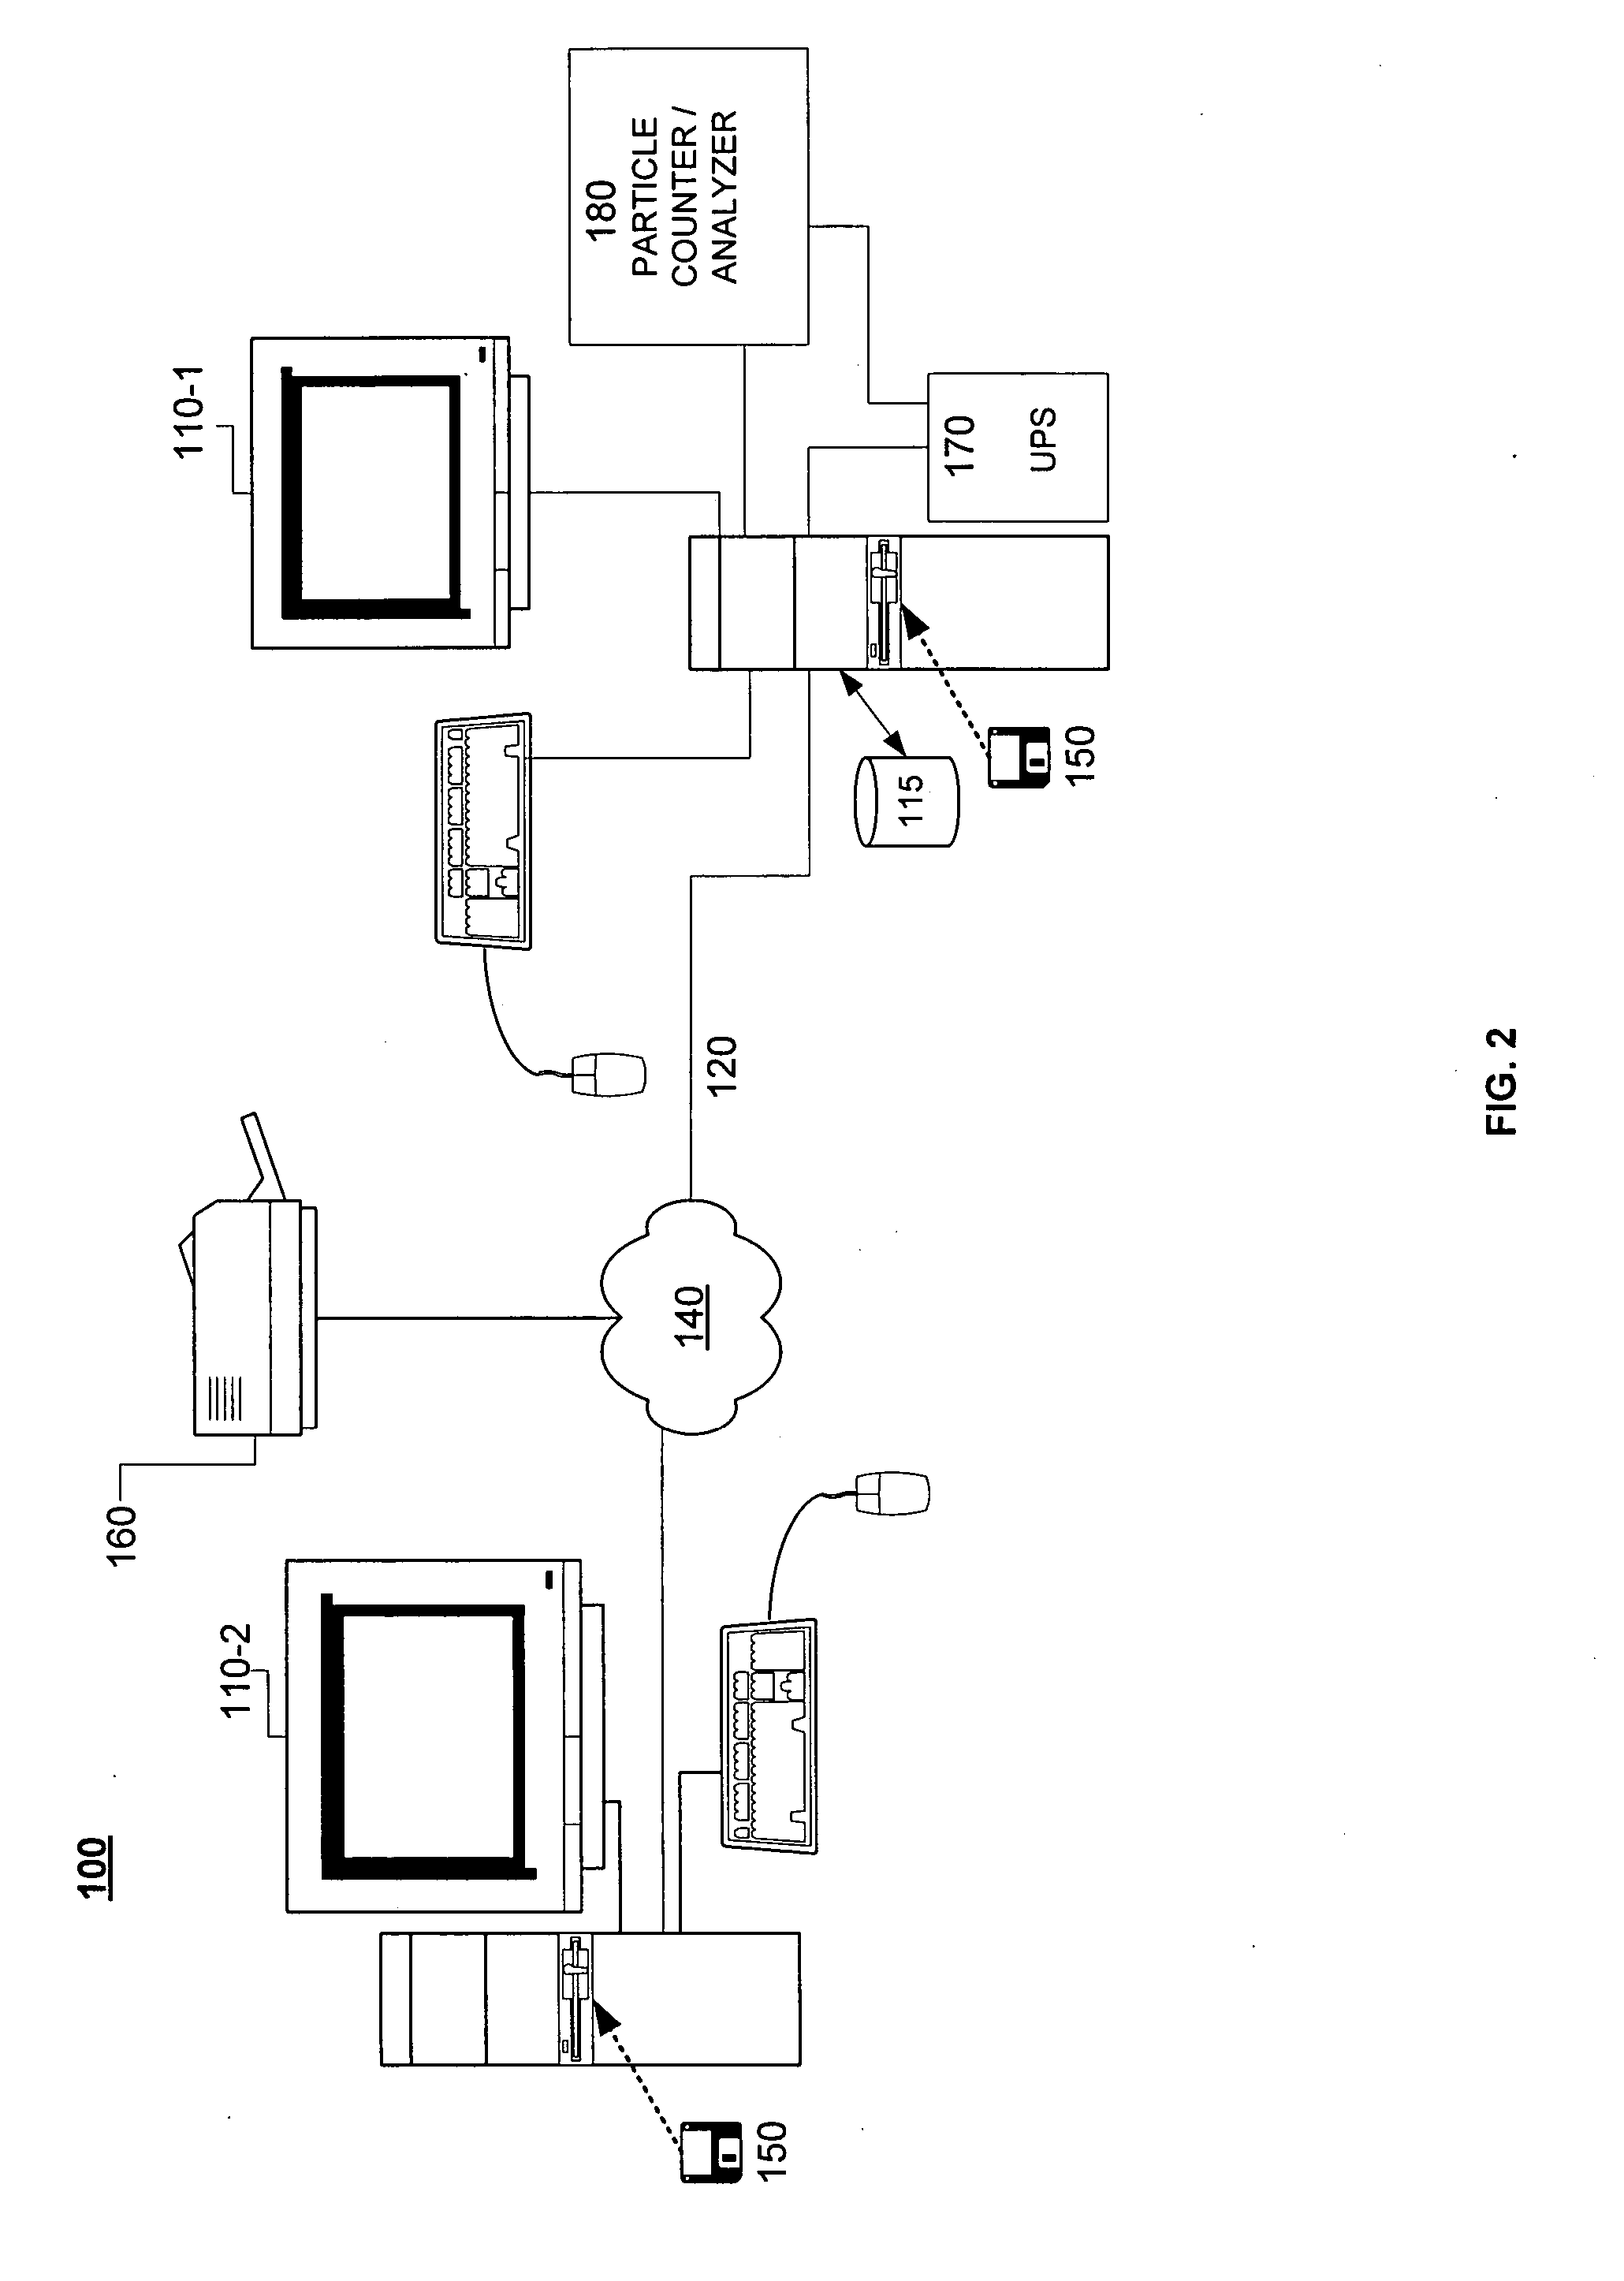 Systems and methods for particle counting